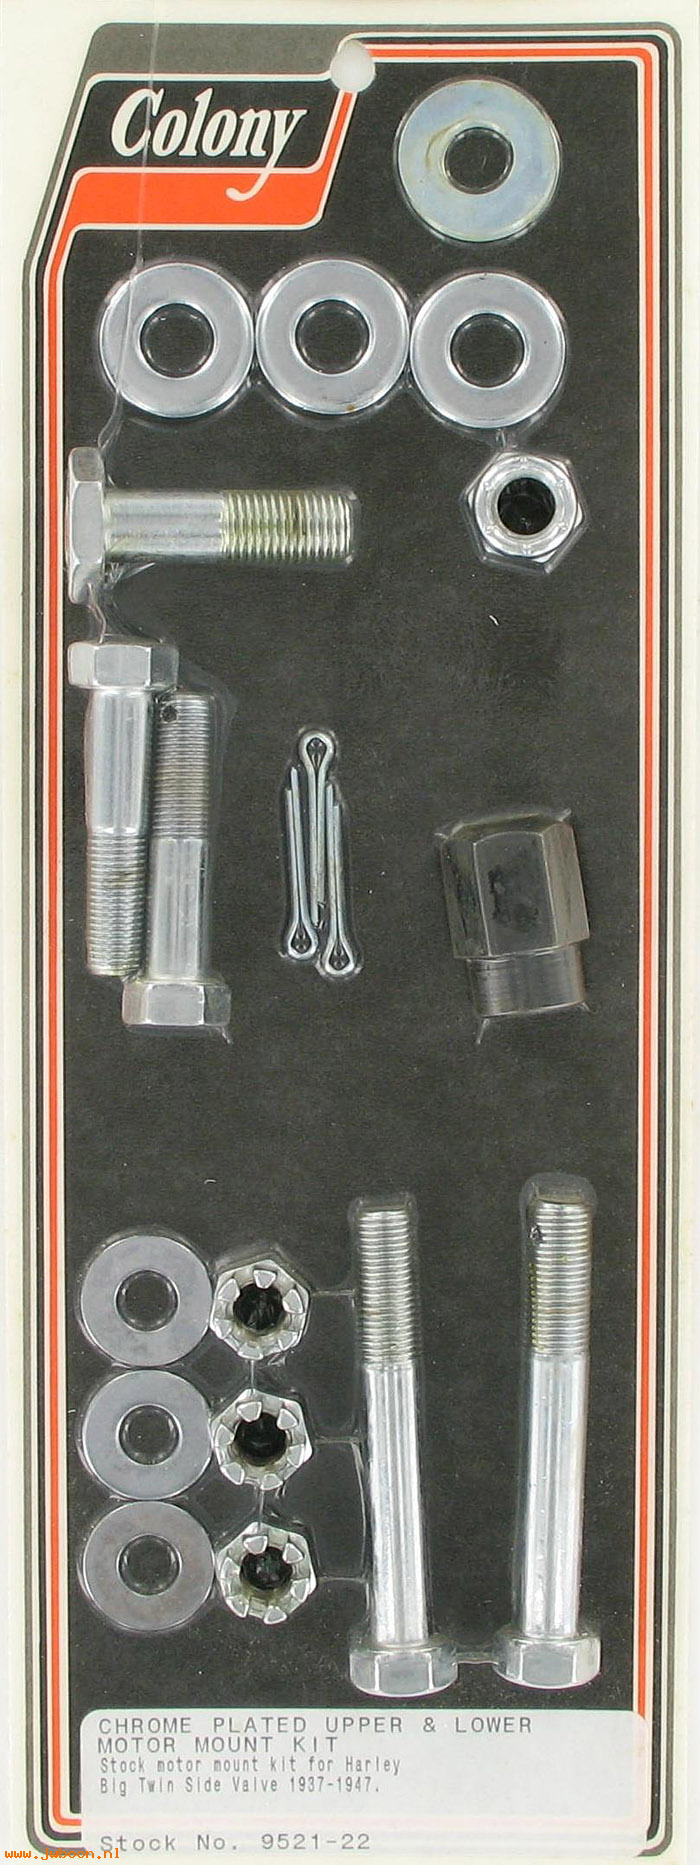 C 9521-22 (24791-36 / 4379): Upper and lower motor mount kit - UL '37-'47, in stock Colony